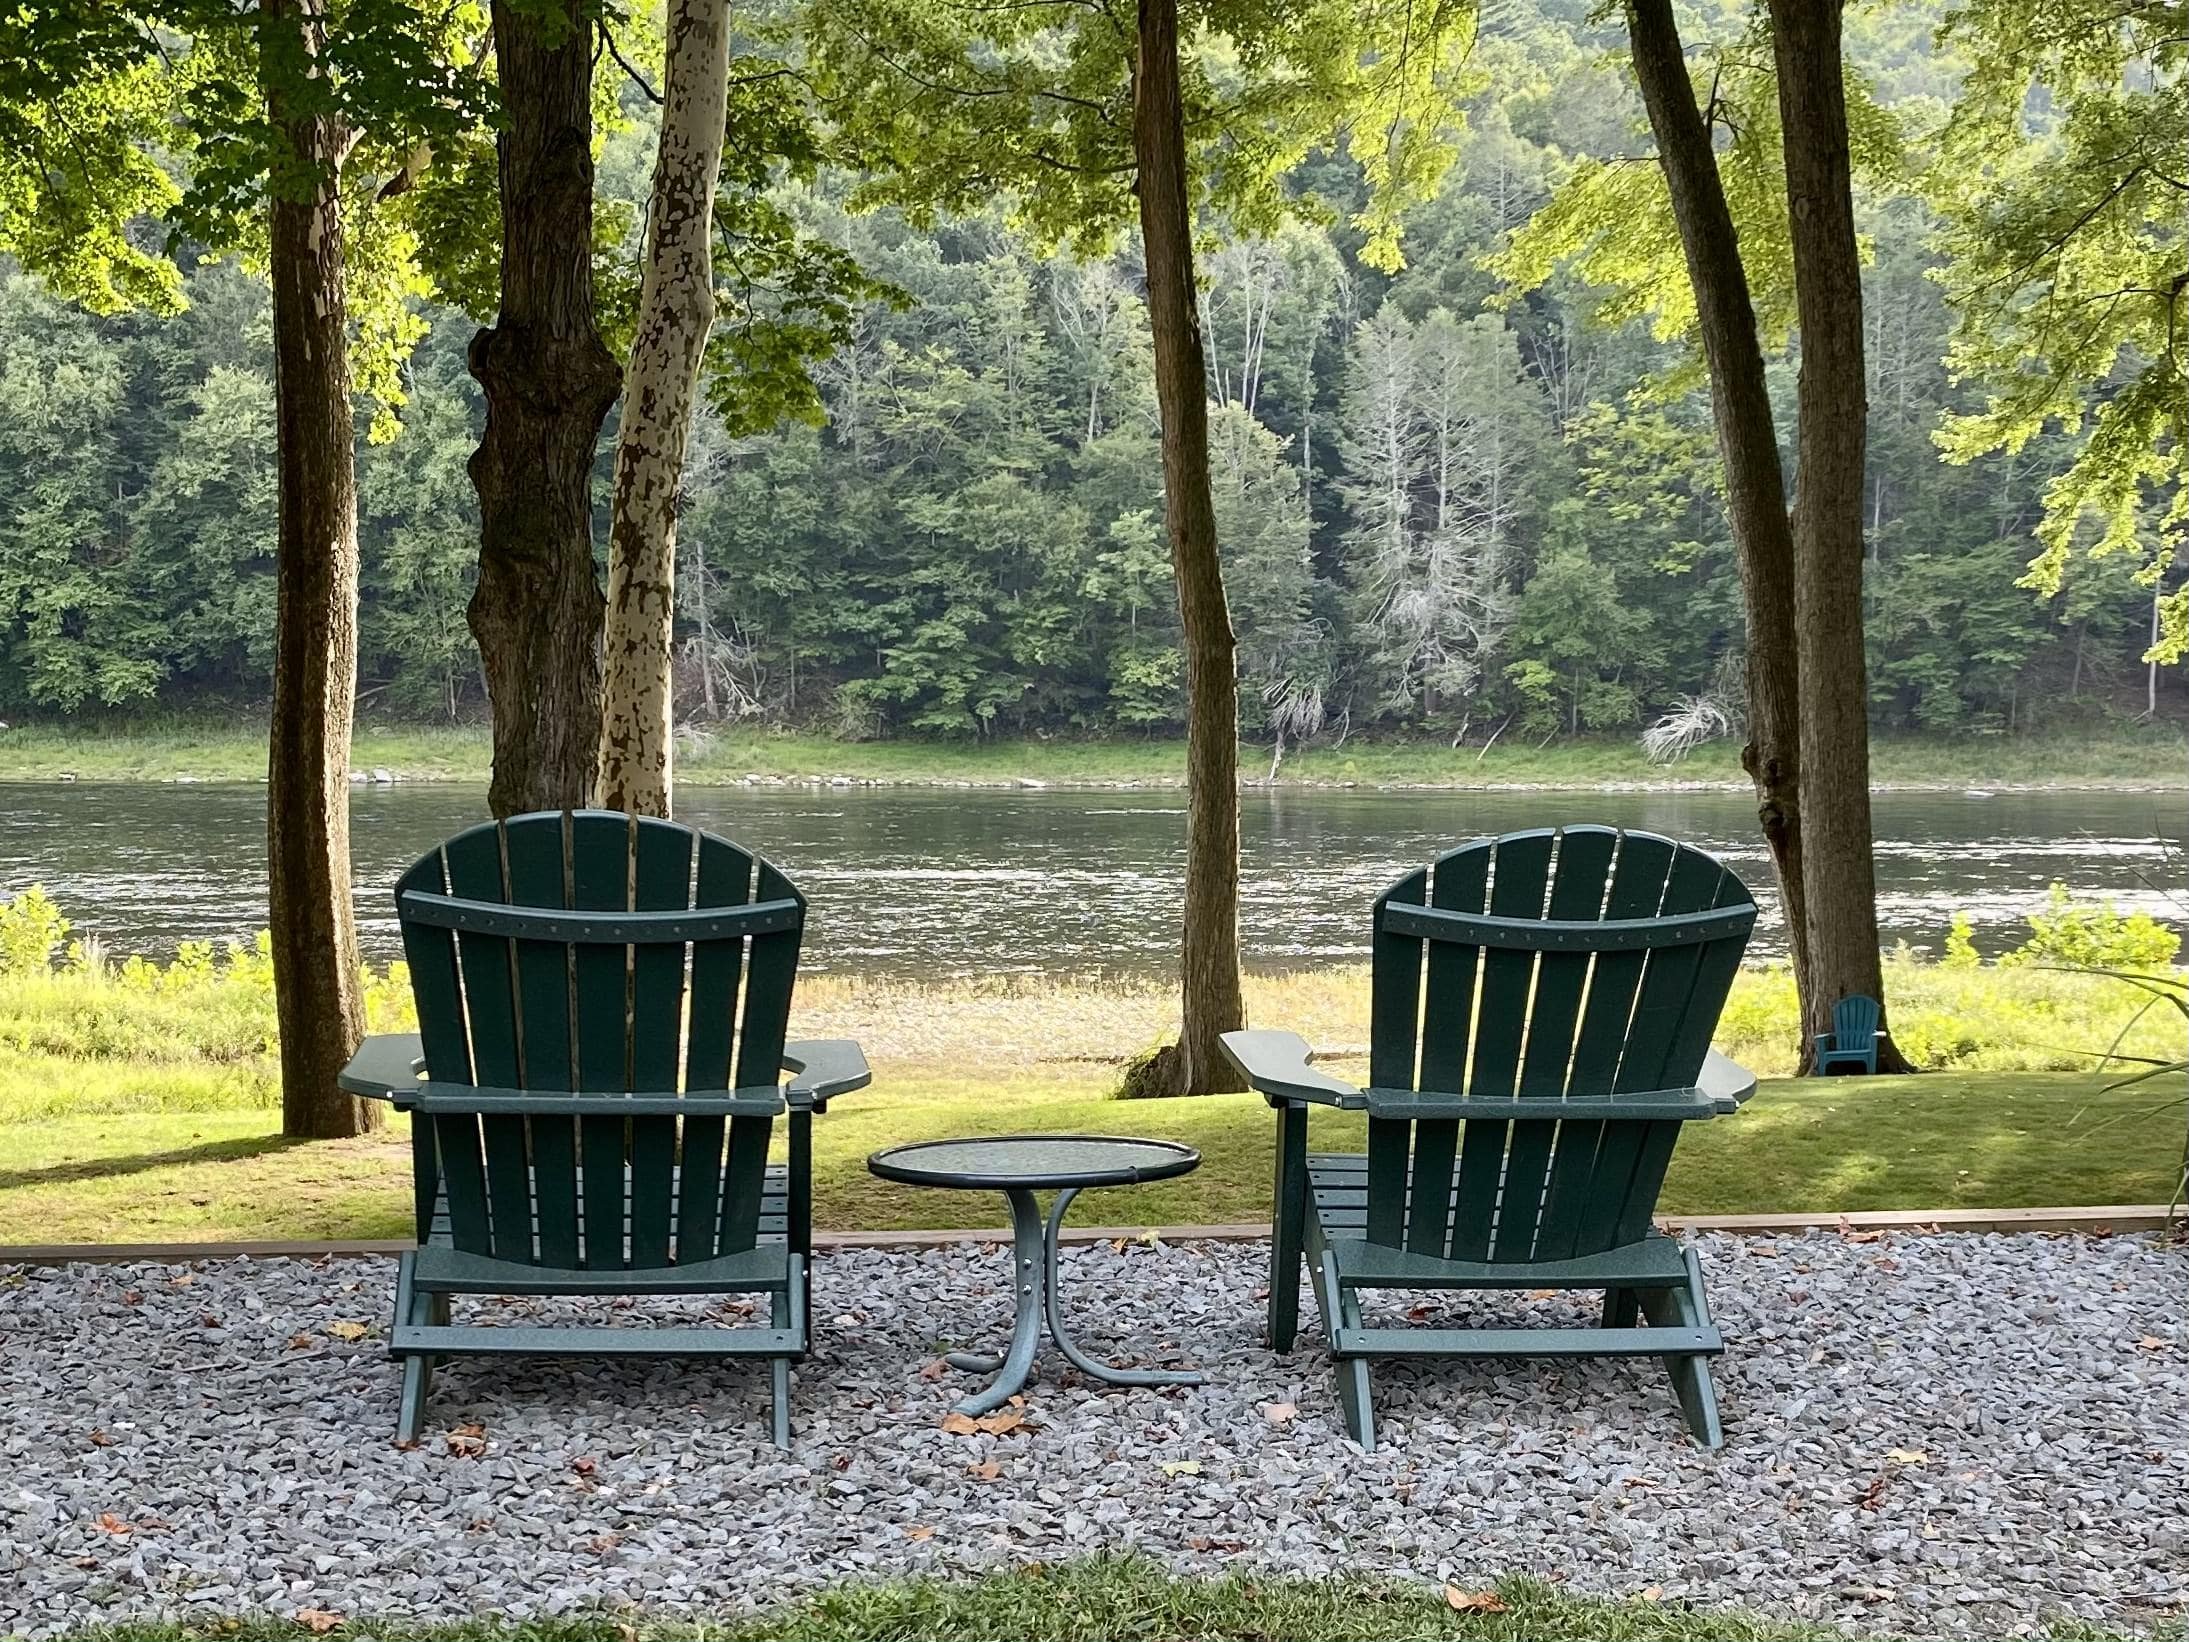 Chairs_Mission Possible Airbnb_Narrowsburg NY.jpg